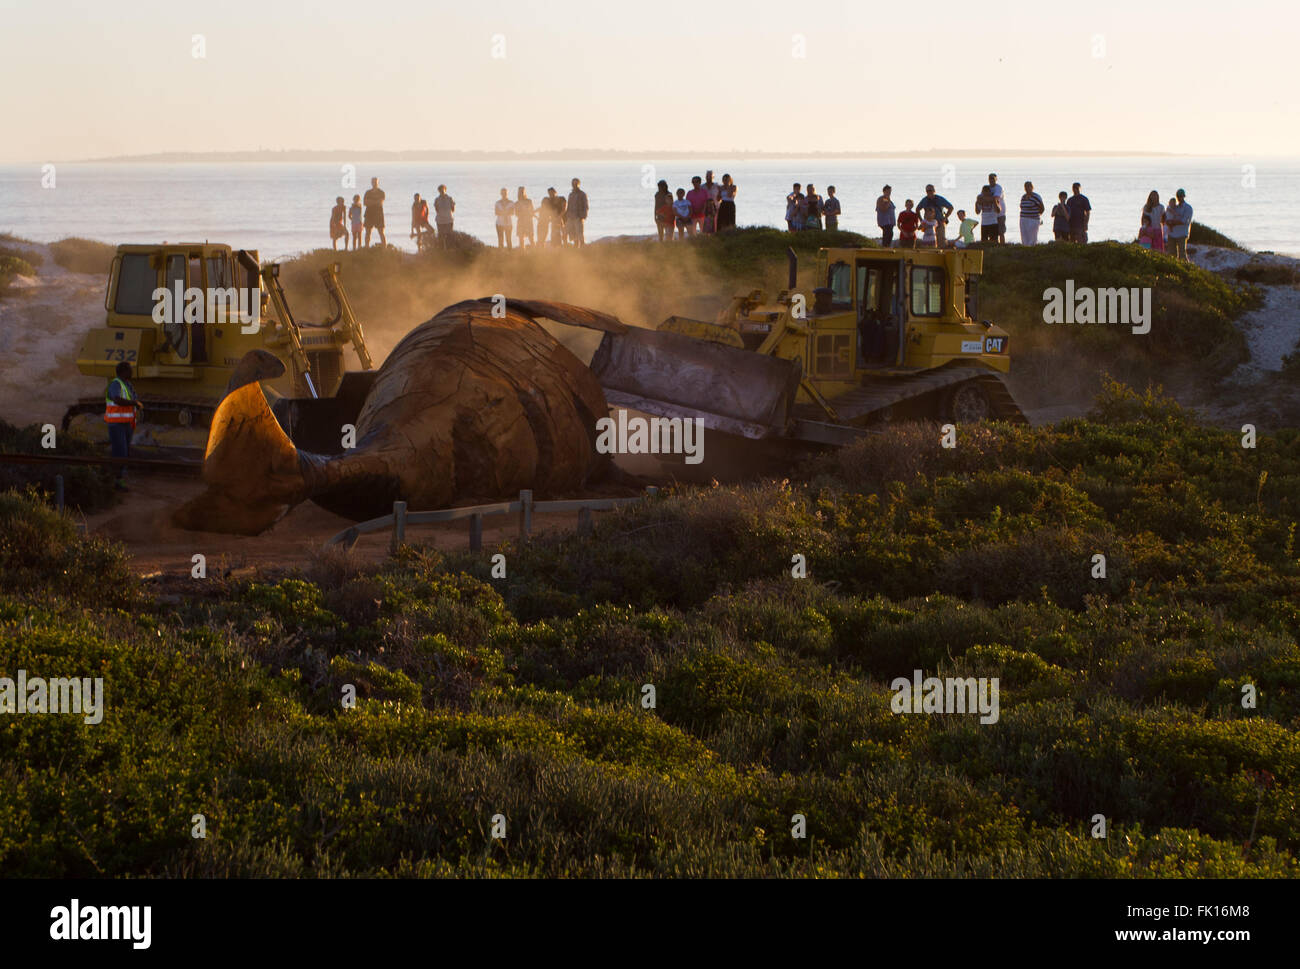 Onlookers watch bulldozers battle to remove a dead, washed up whale from a beach on the west coast of South Africa. Robben Island is visible in the background. Stock Photo